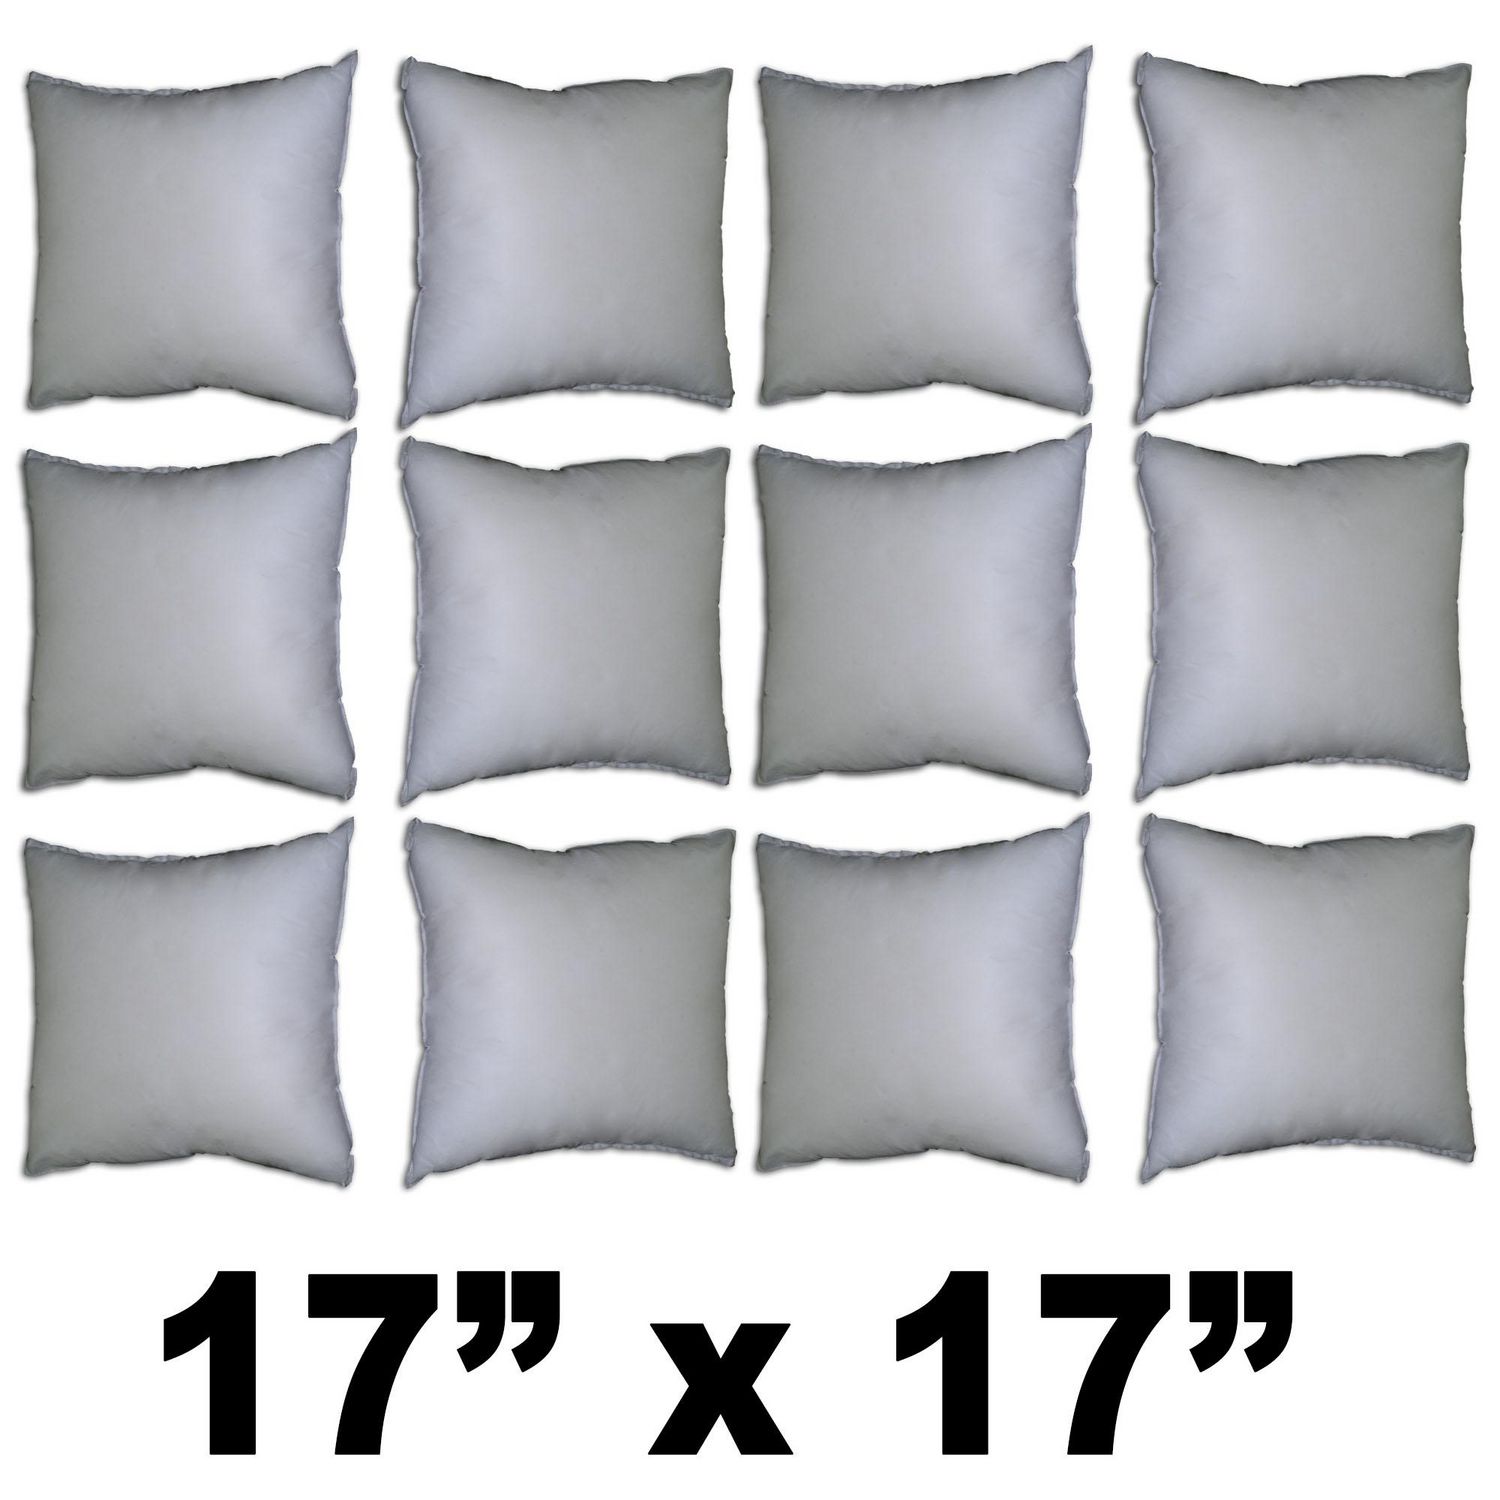 Hometex Square Polyester Fill Pillow Form | Walmart Canada